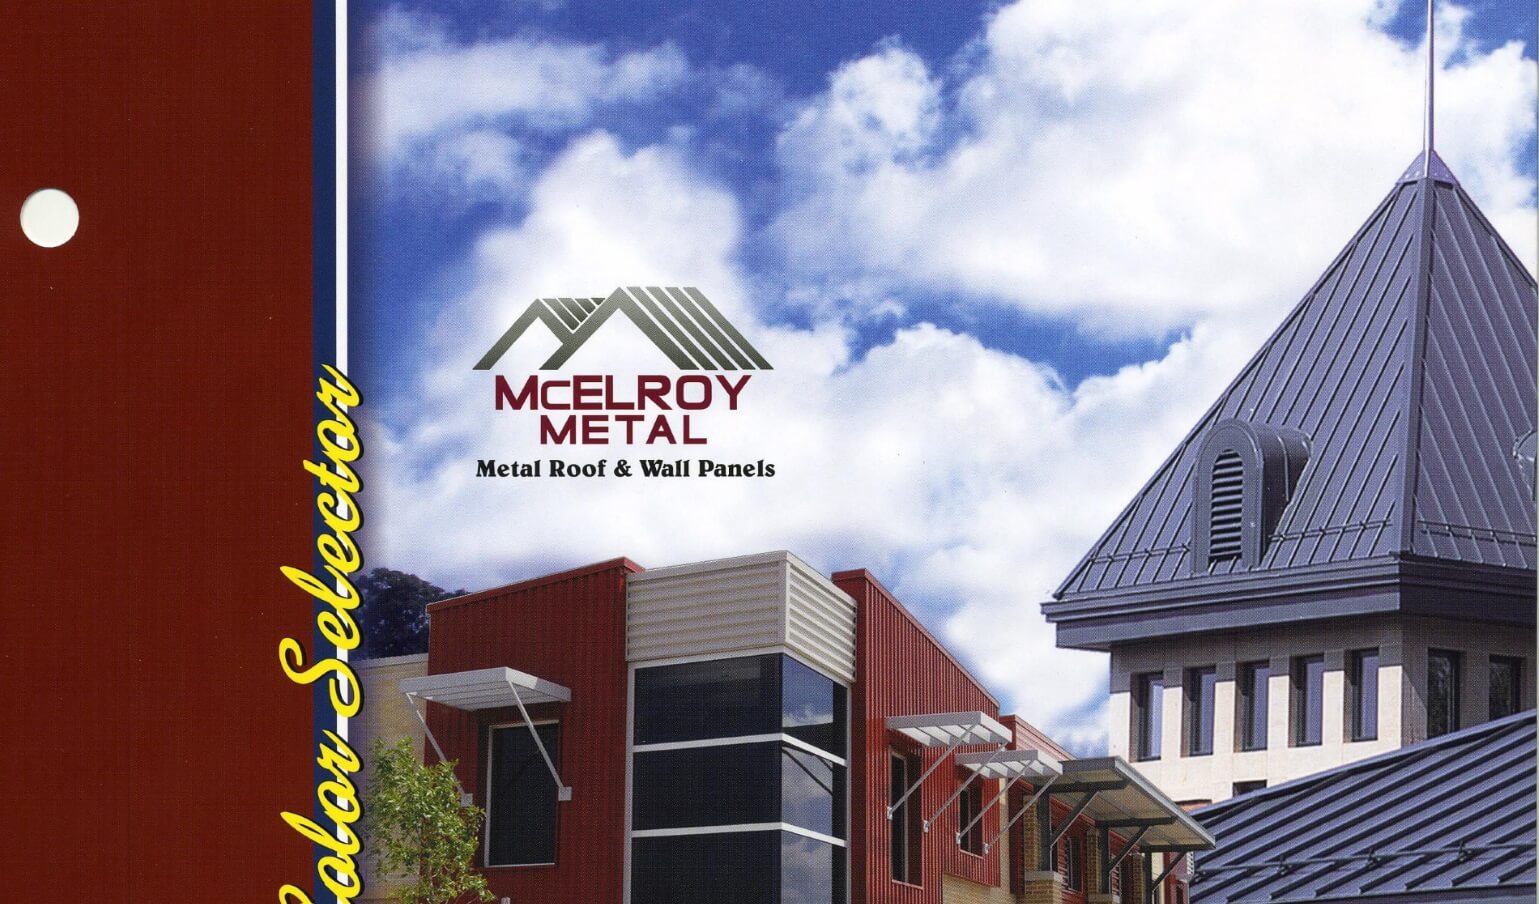 McElroy Metal publishes updated Architectural Colors chart